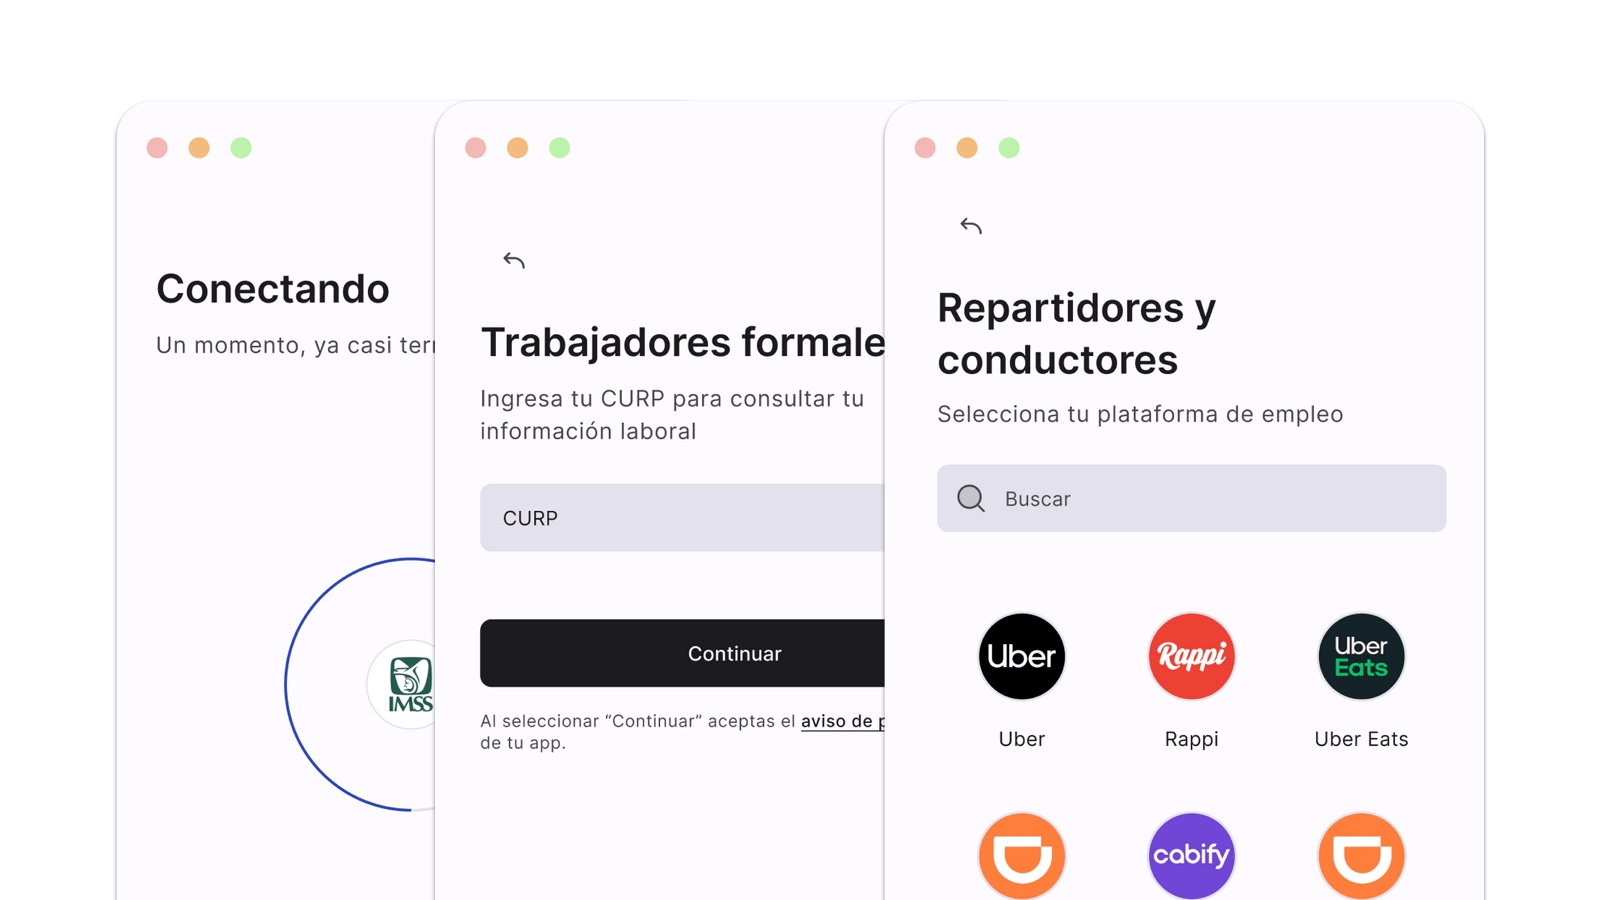 Palenca Raises Data Integration In Latam, Targets 300 Million Workers For Credit Access